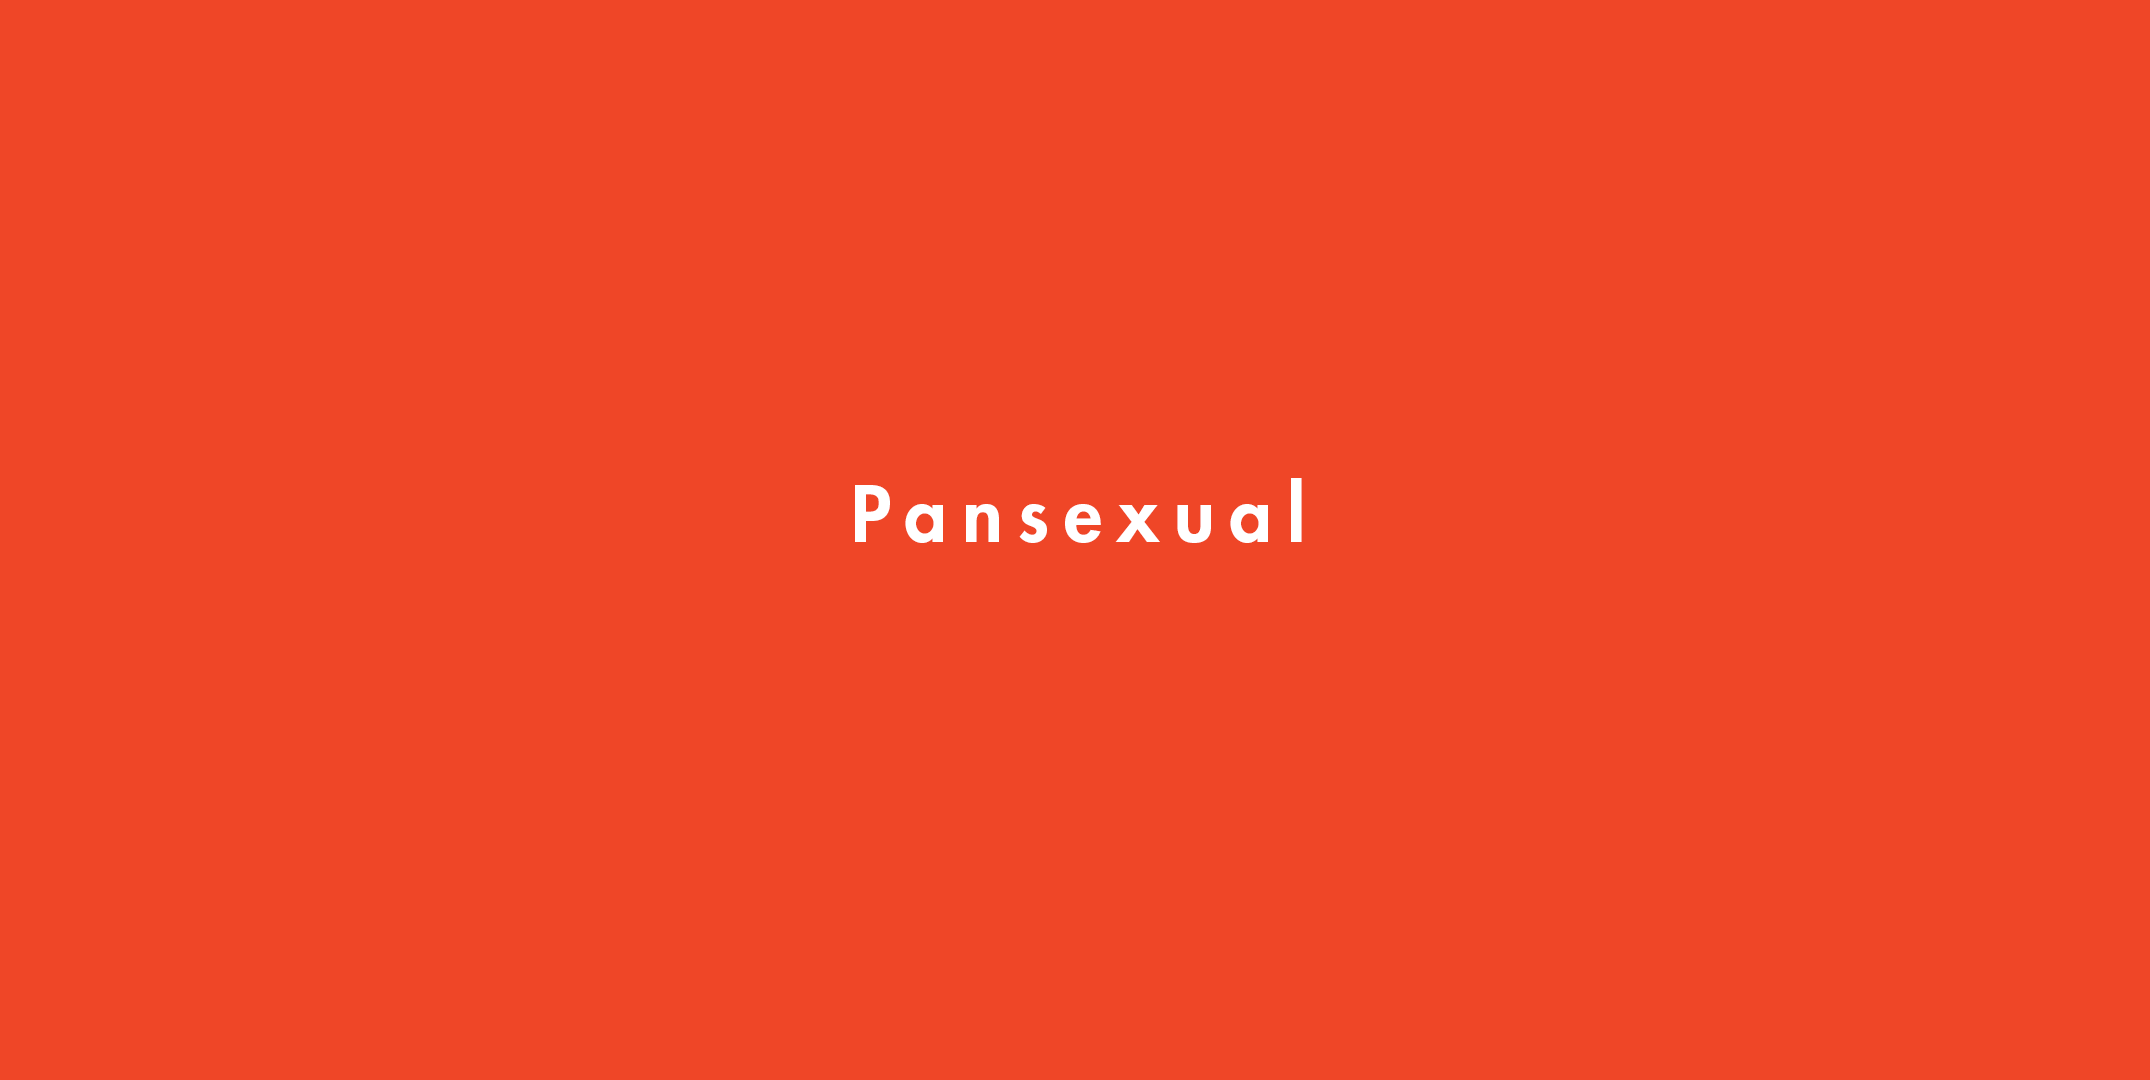 Pansexual mean